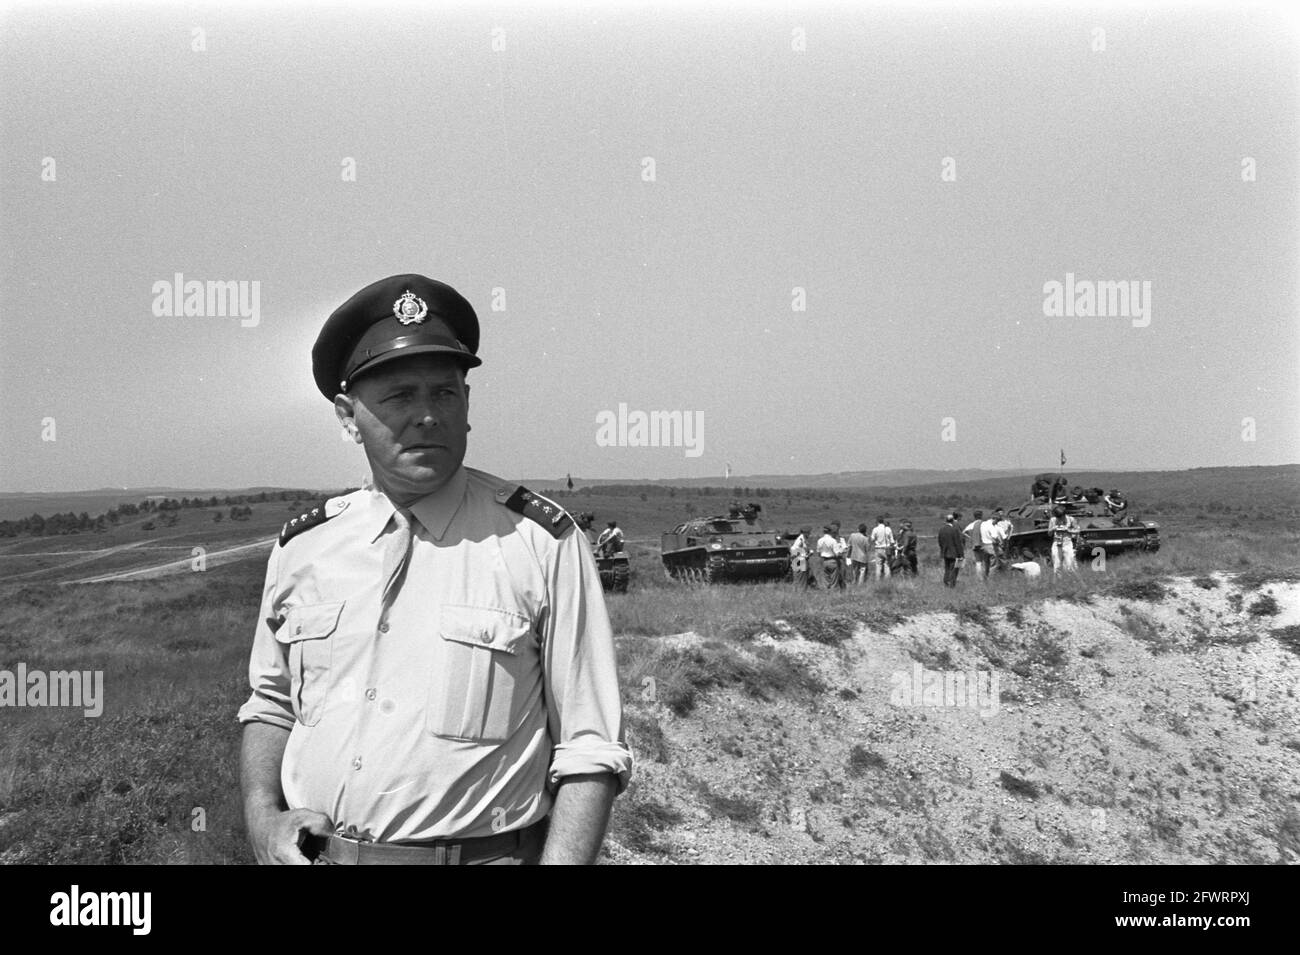 Dutch army exercises in La Courtine, France; Colonel W. Brouwer, commander-in-chief troops in La Courtine, August 7, 1970, armies, commanders-in-chief, The Netherlands, 20th century press agency photo, news to remember, documentary, historic photography 1945-1990, visual stories, human history of the Twentieth Century, capturing moments in time Stock Photo